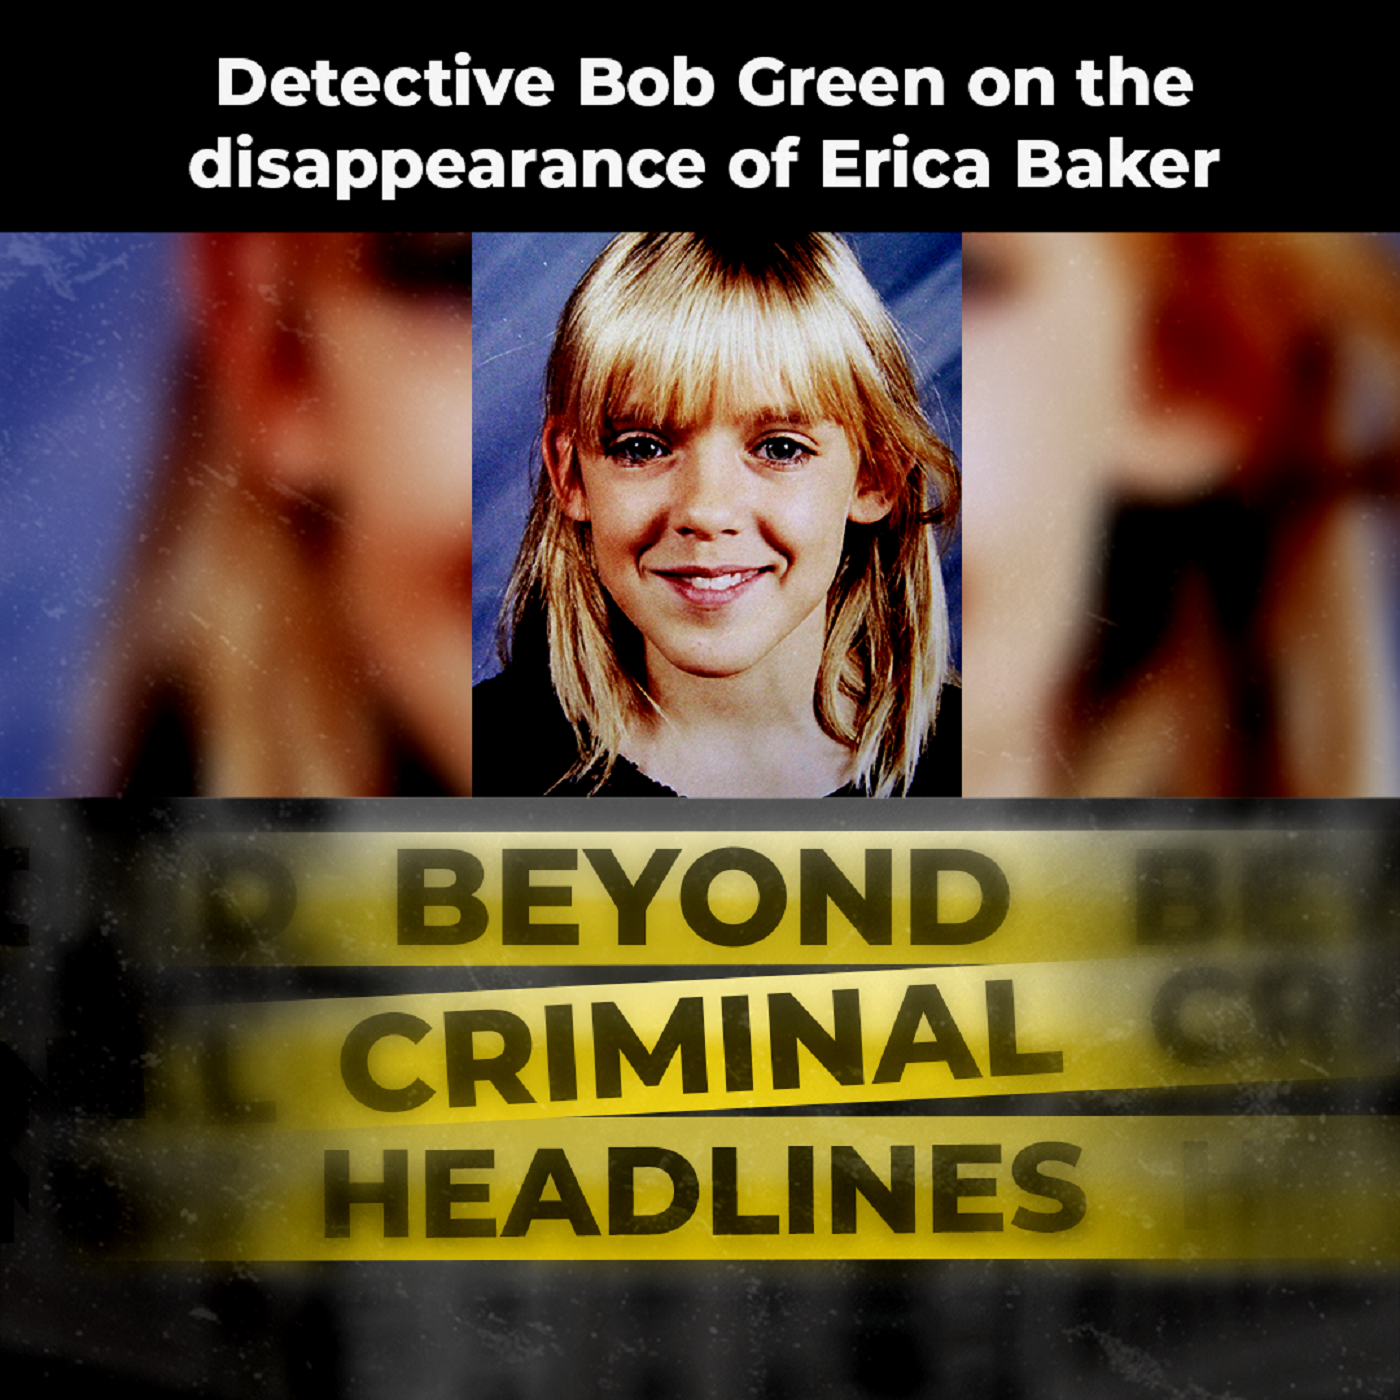 Detective Bob Green on the disappearance of Erica Baker